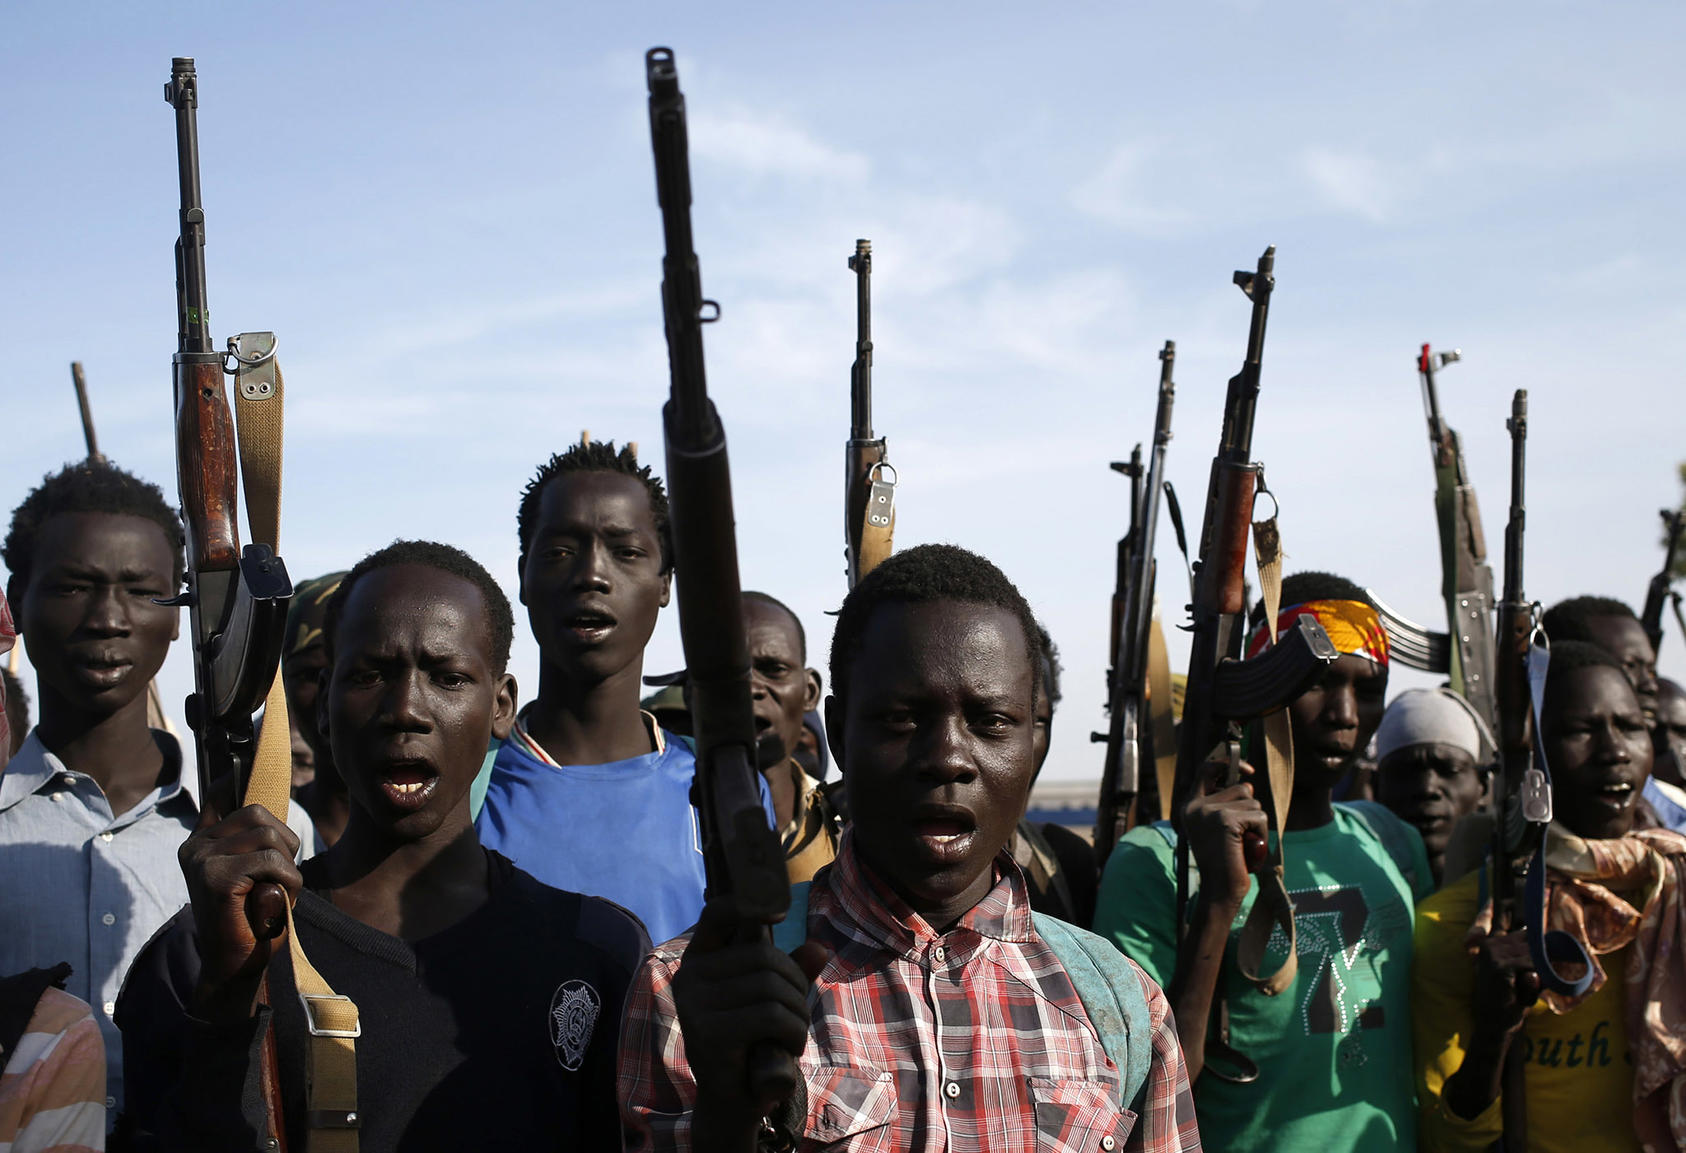 Rebel fighters hold their weapons in Upper Nile State in February 2014. (Goran Tomasevic/Reuters)